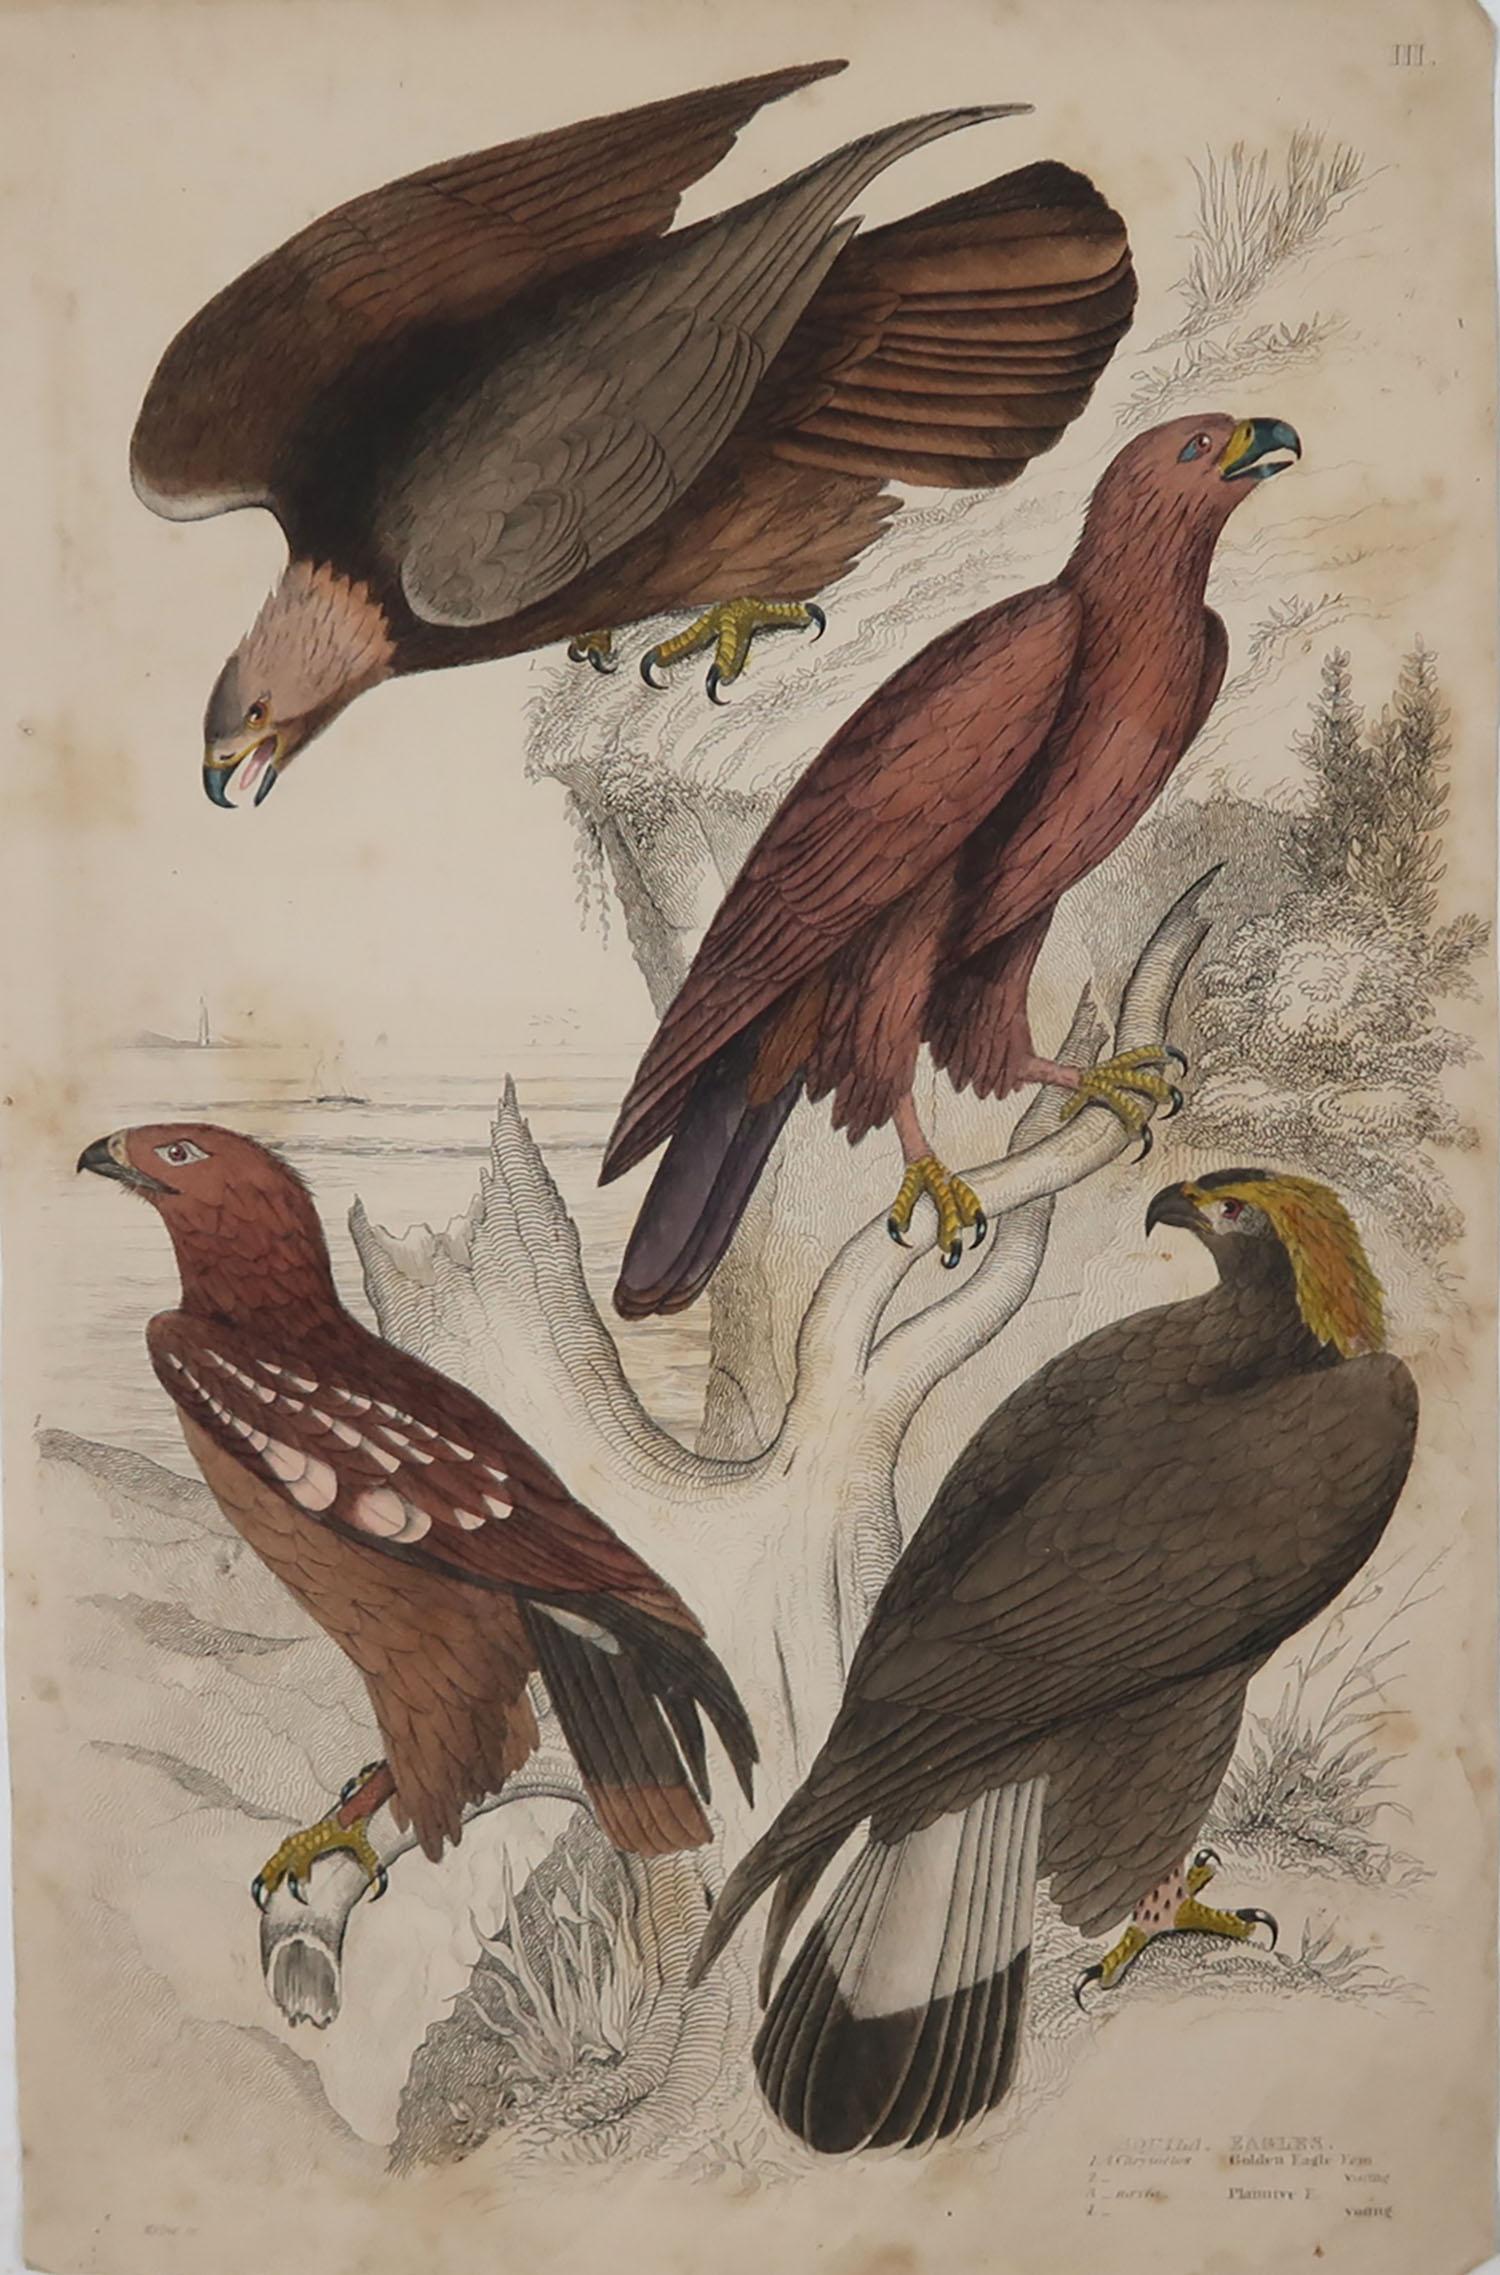 Great image of eagles

Unframed. It gives you the option of perhaps making a set up using your own choice of frames.

Lithograph after Cpt. Brown and Marechal with original hand color.

Published circa 1835

Slightly creased and there is